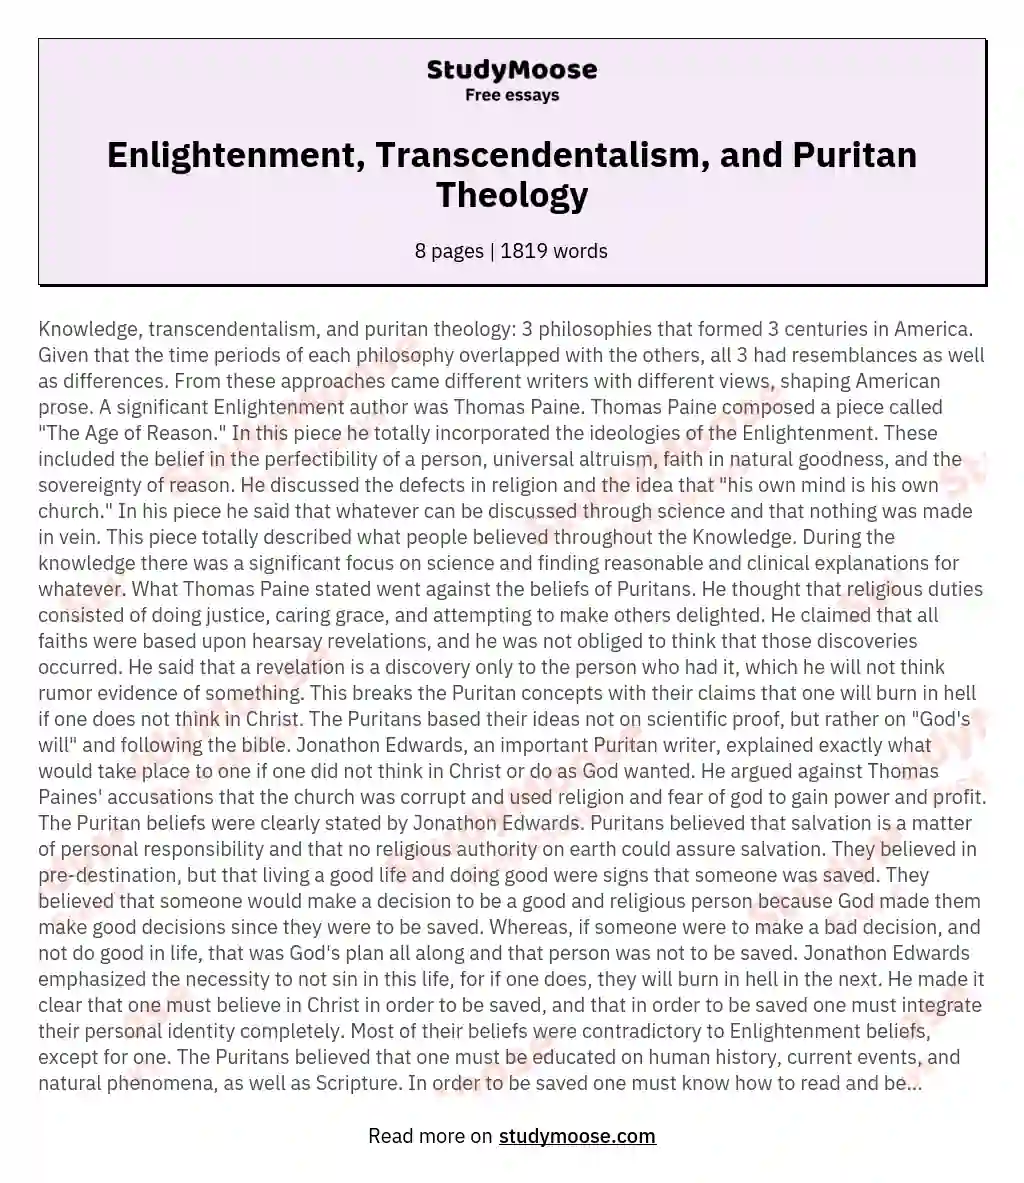 Enlightenment, Transcendentalism, and Puritan Theology